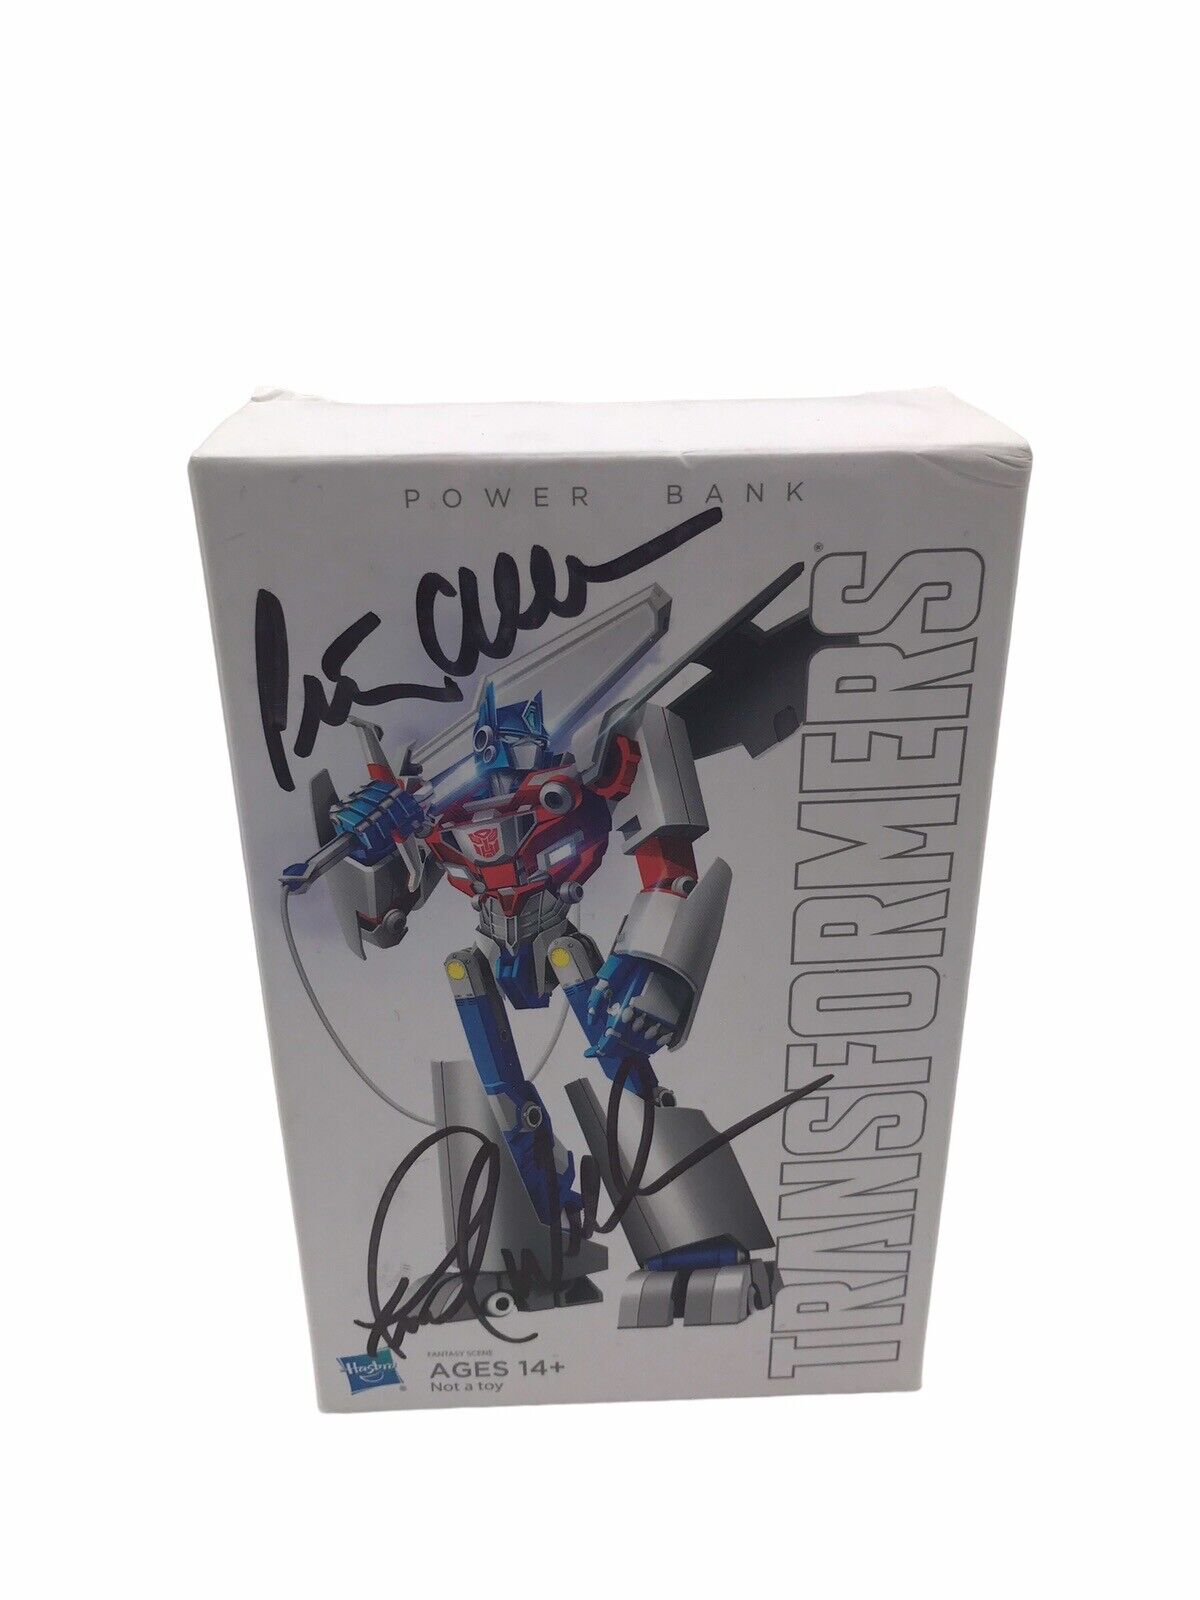 TRANSFORMERS POWER BANK HASCON 2017 - AUTOGRAPHED By Frank Welker & Peter Cullen